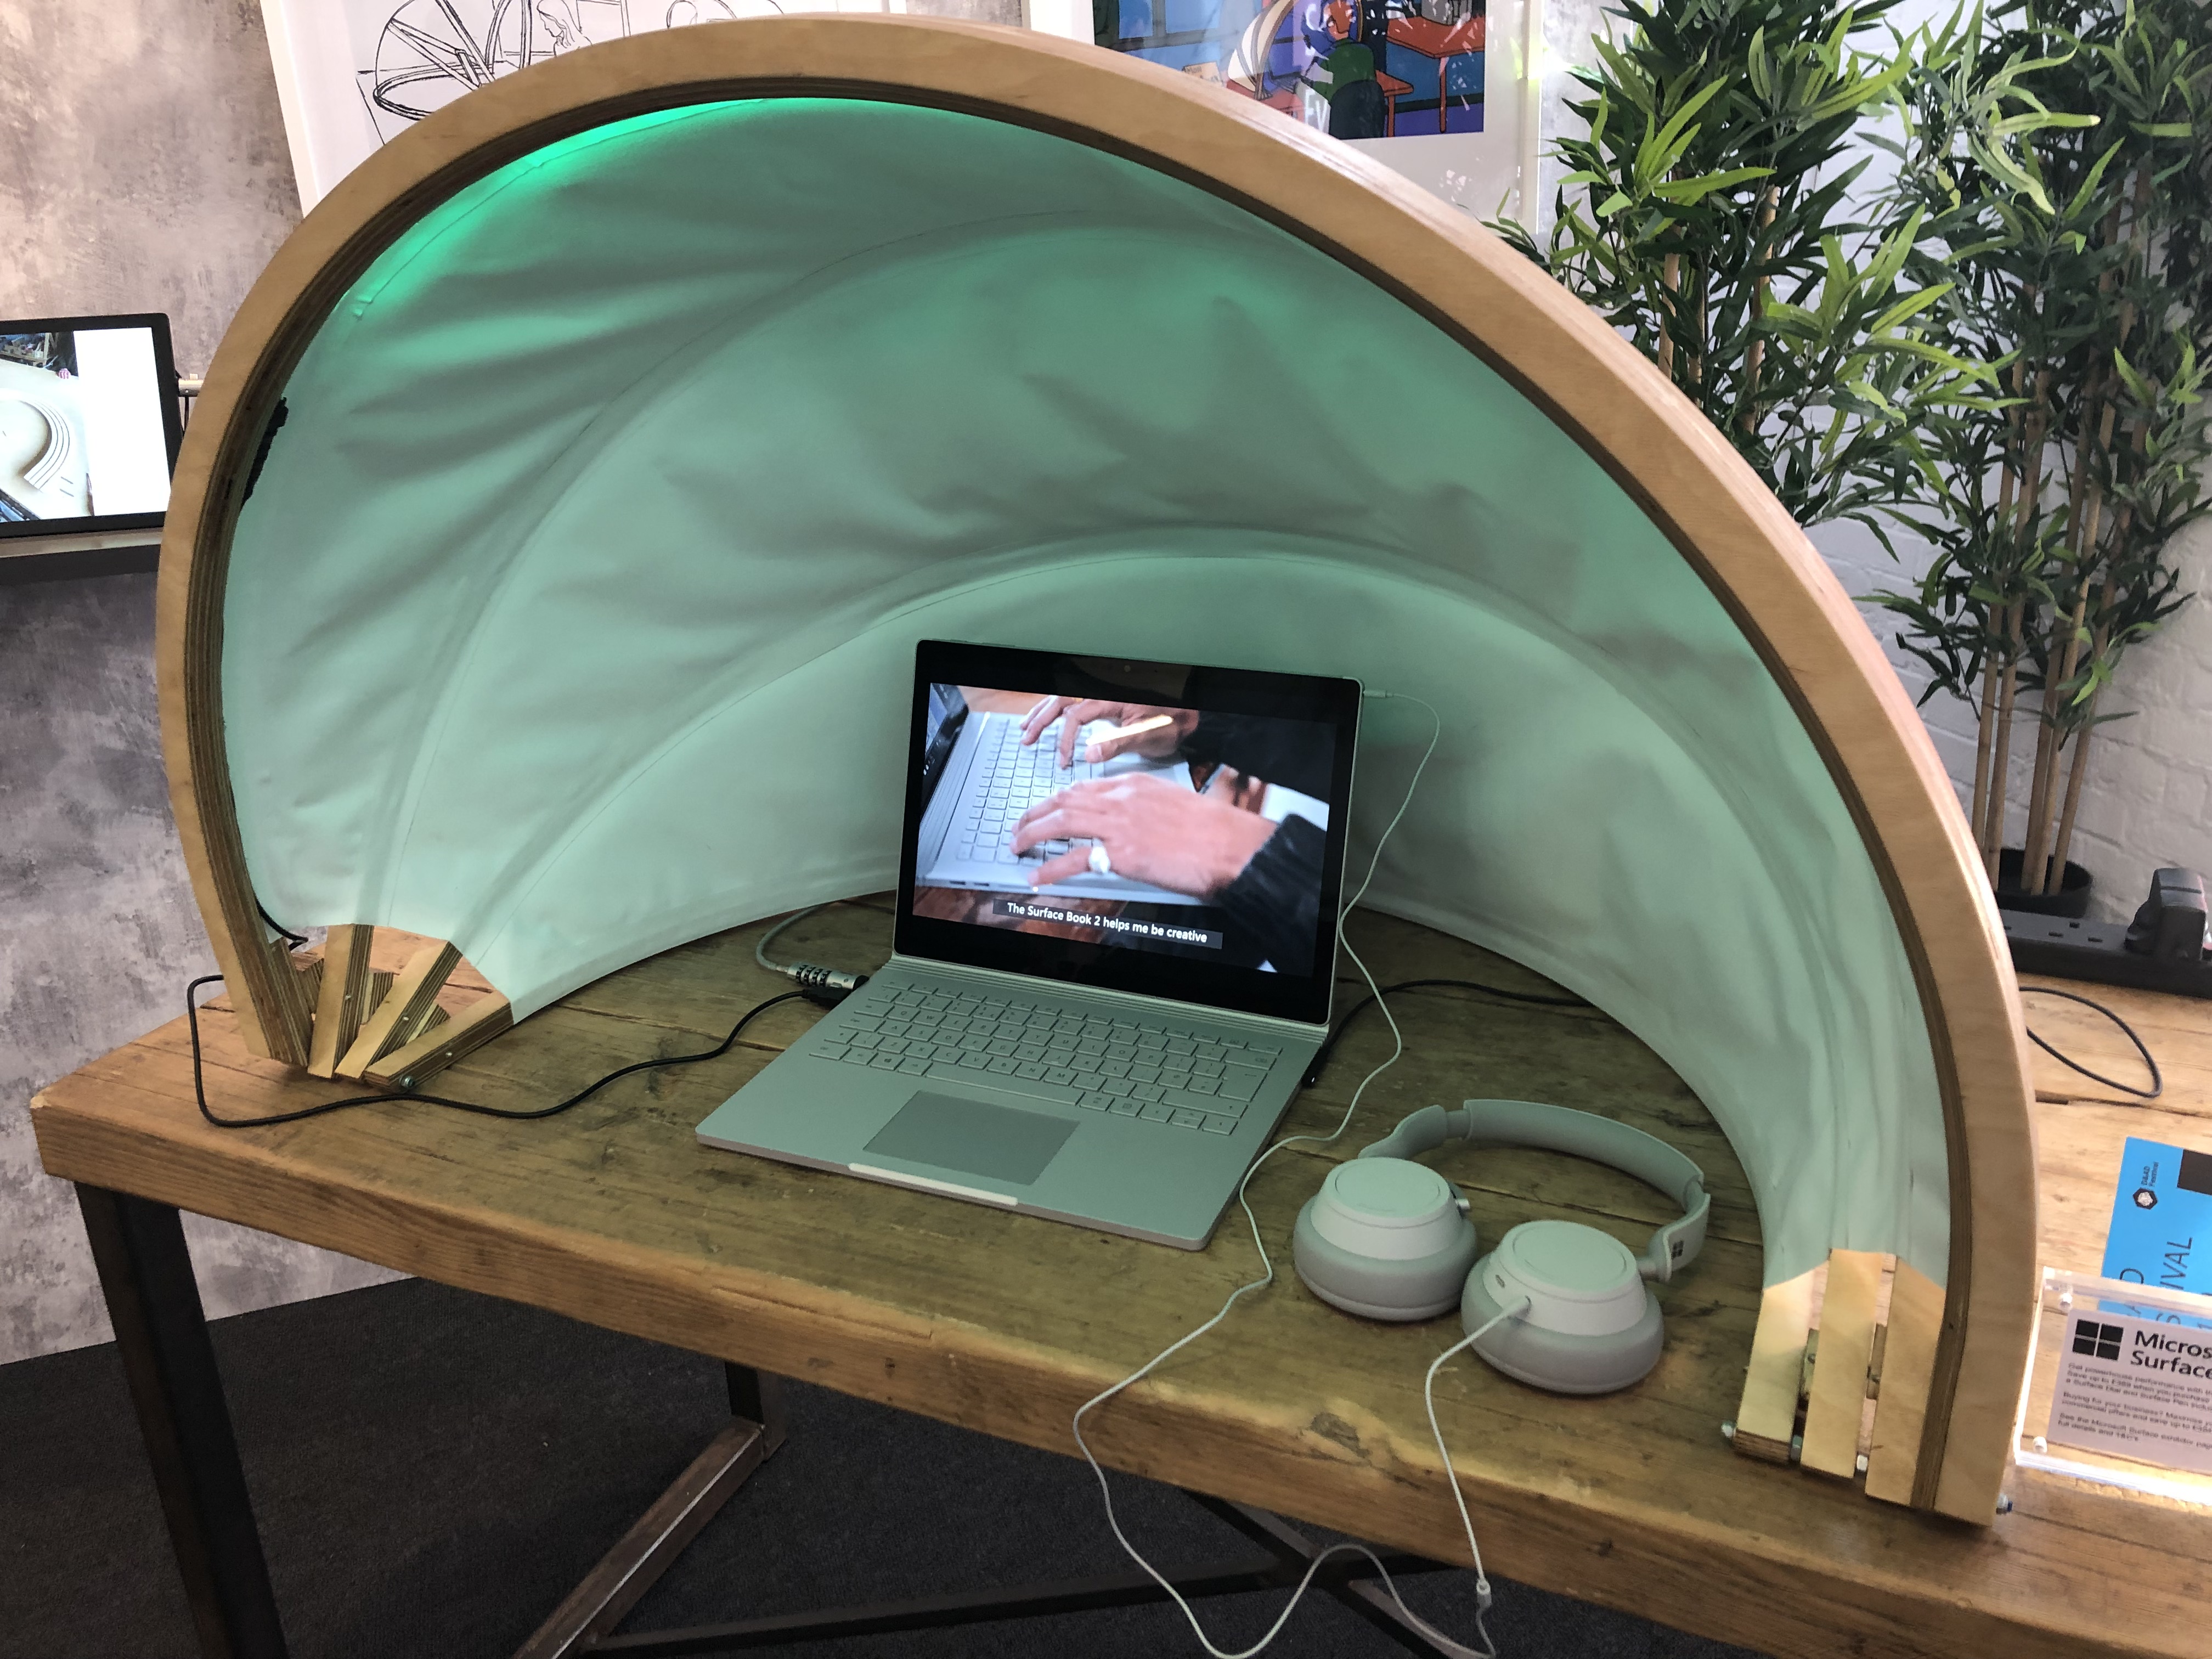 A tent-like invention that aims to help people focus at work